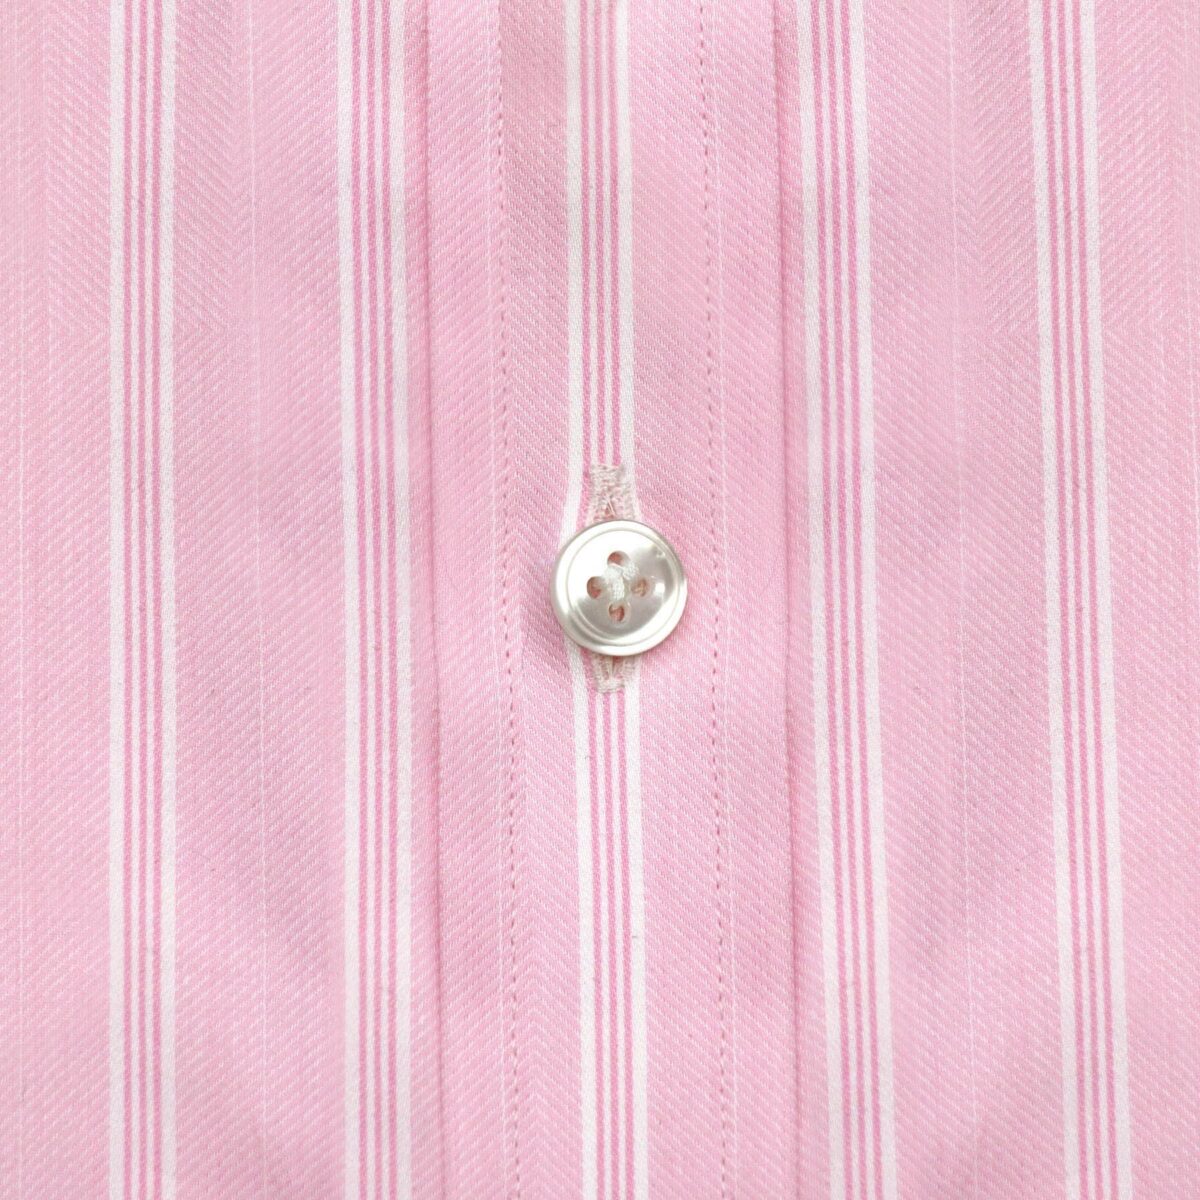 Pink White Stripes High Button Down Collar Shirt with 2 Buttons, made to measure by John Clothier in 100% Cotton, exclusive high collar collection for men